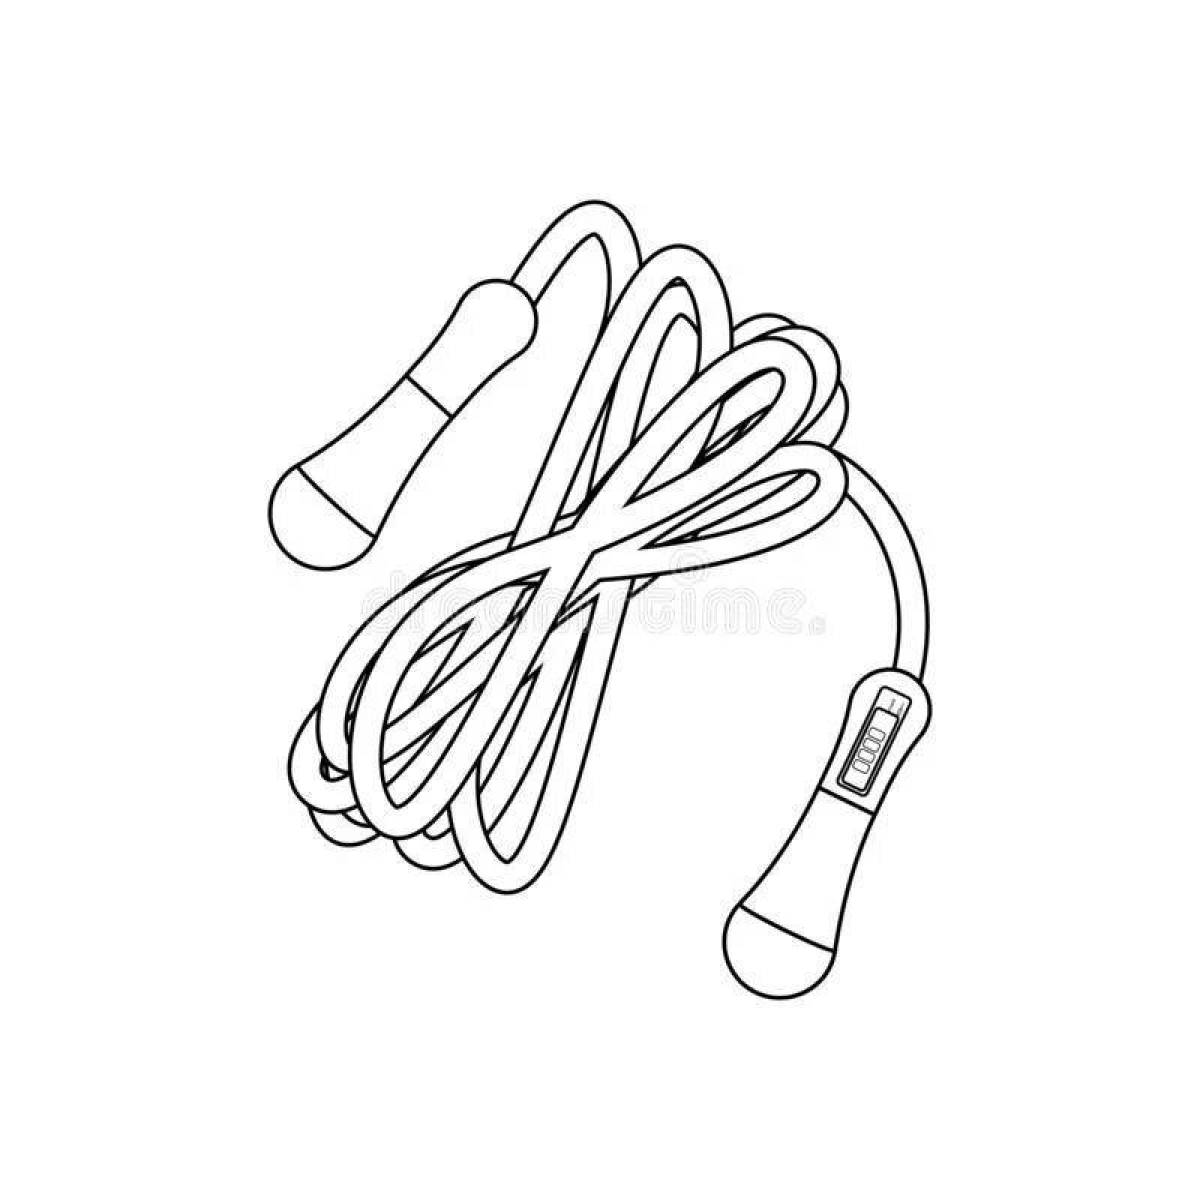 Live jump rope coloring page